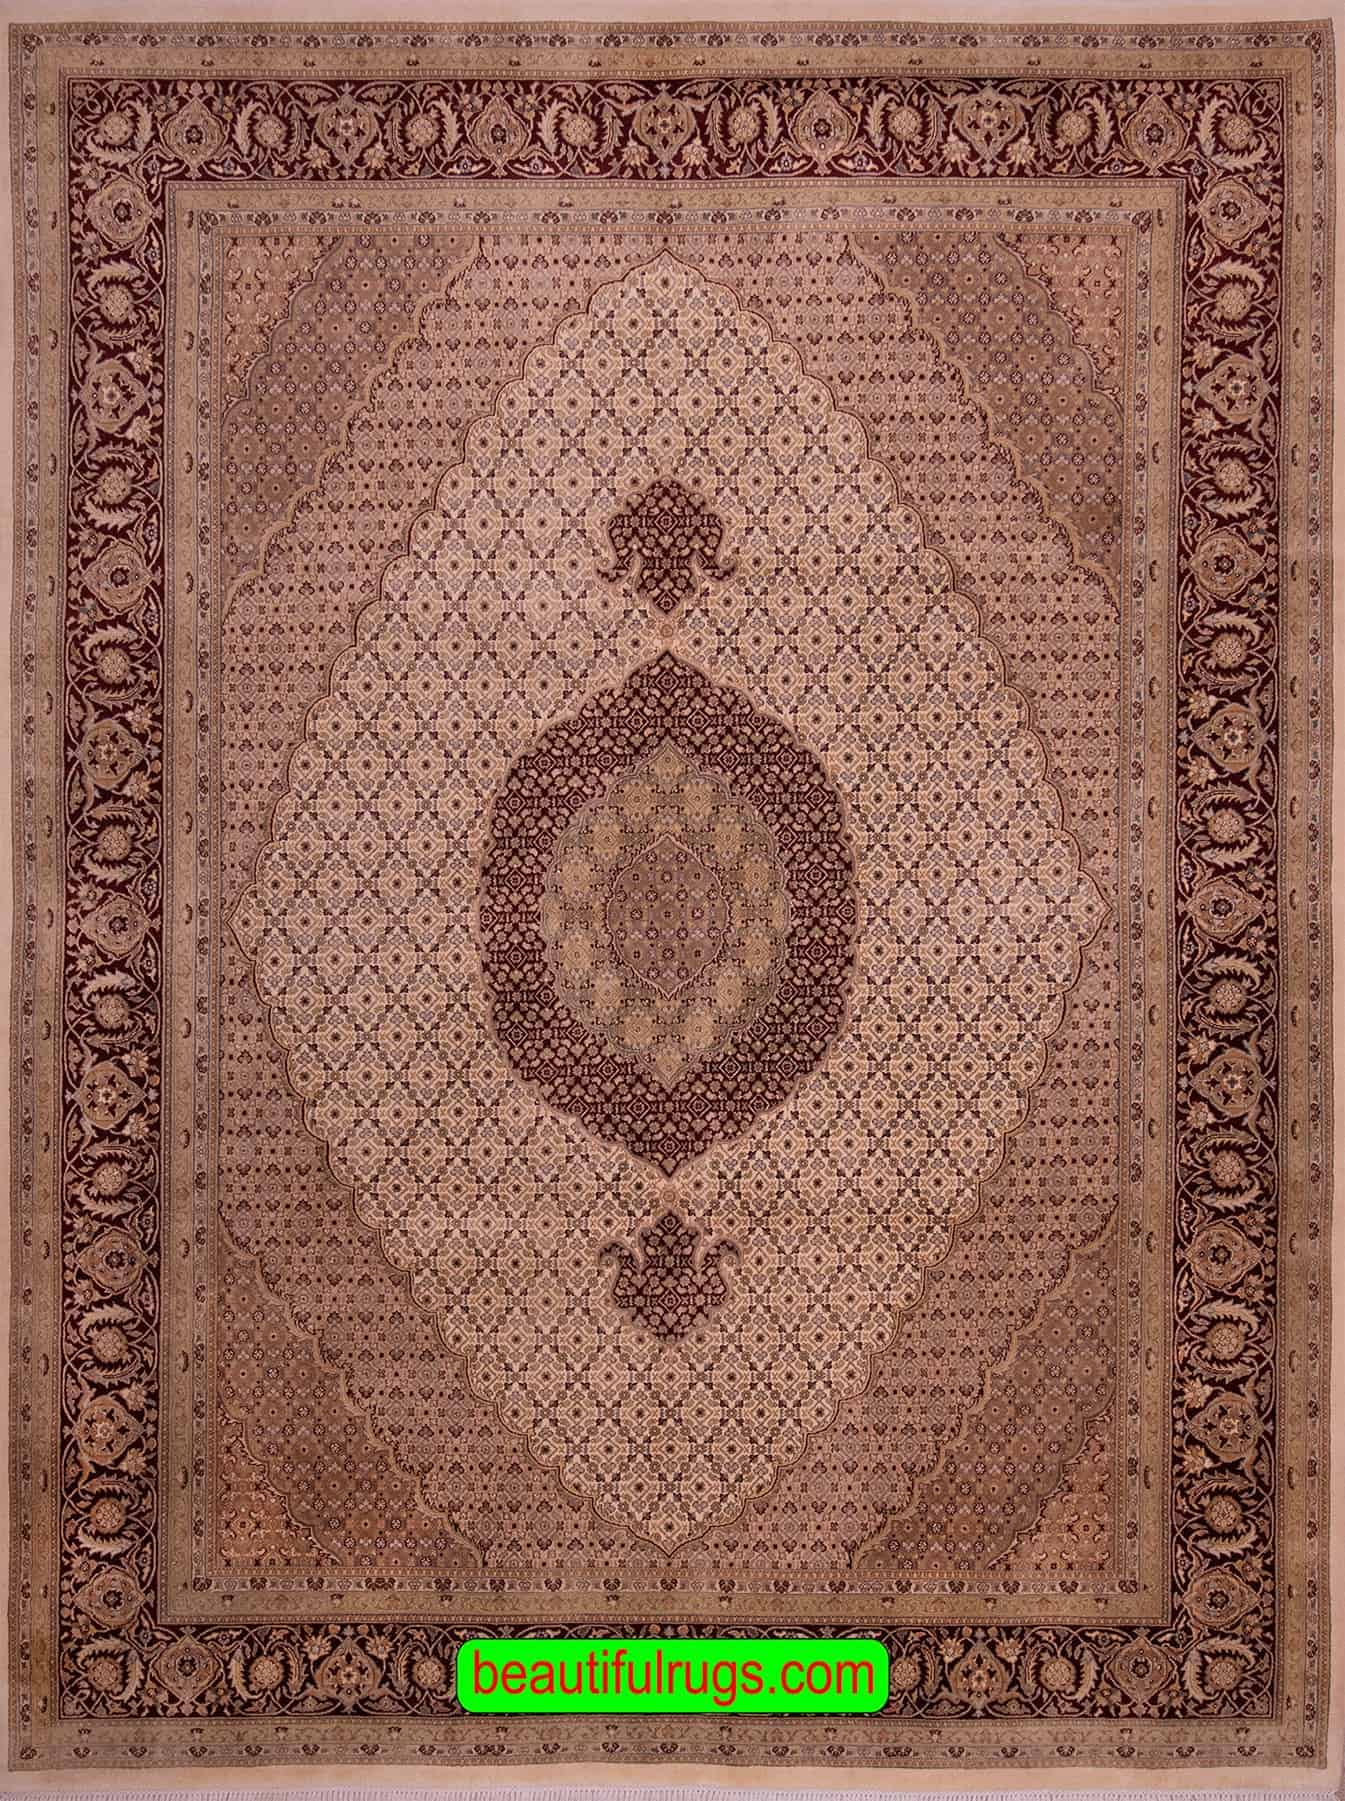 Medallion Area Rug, Oriental Rug from Caspian Areas with Beige and Red Colors. Size 8.1x10.5